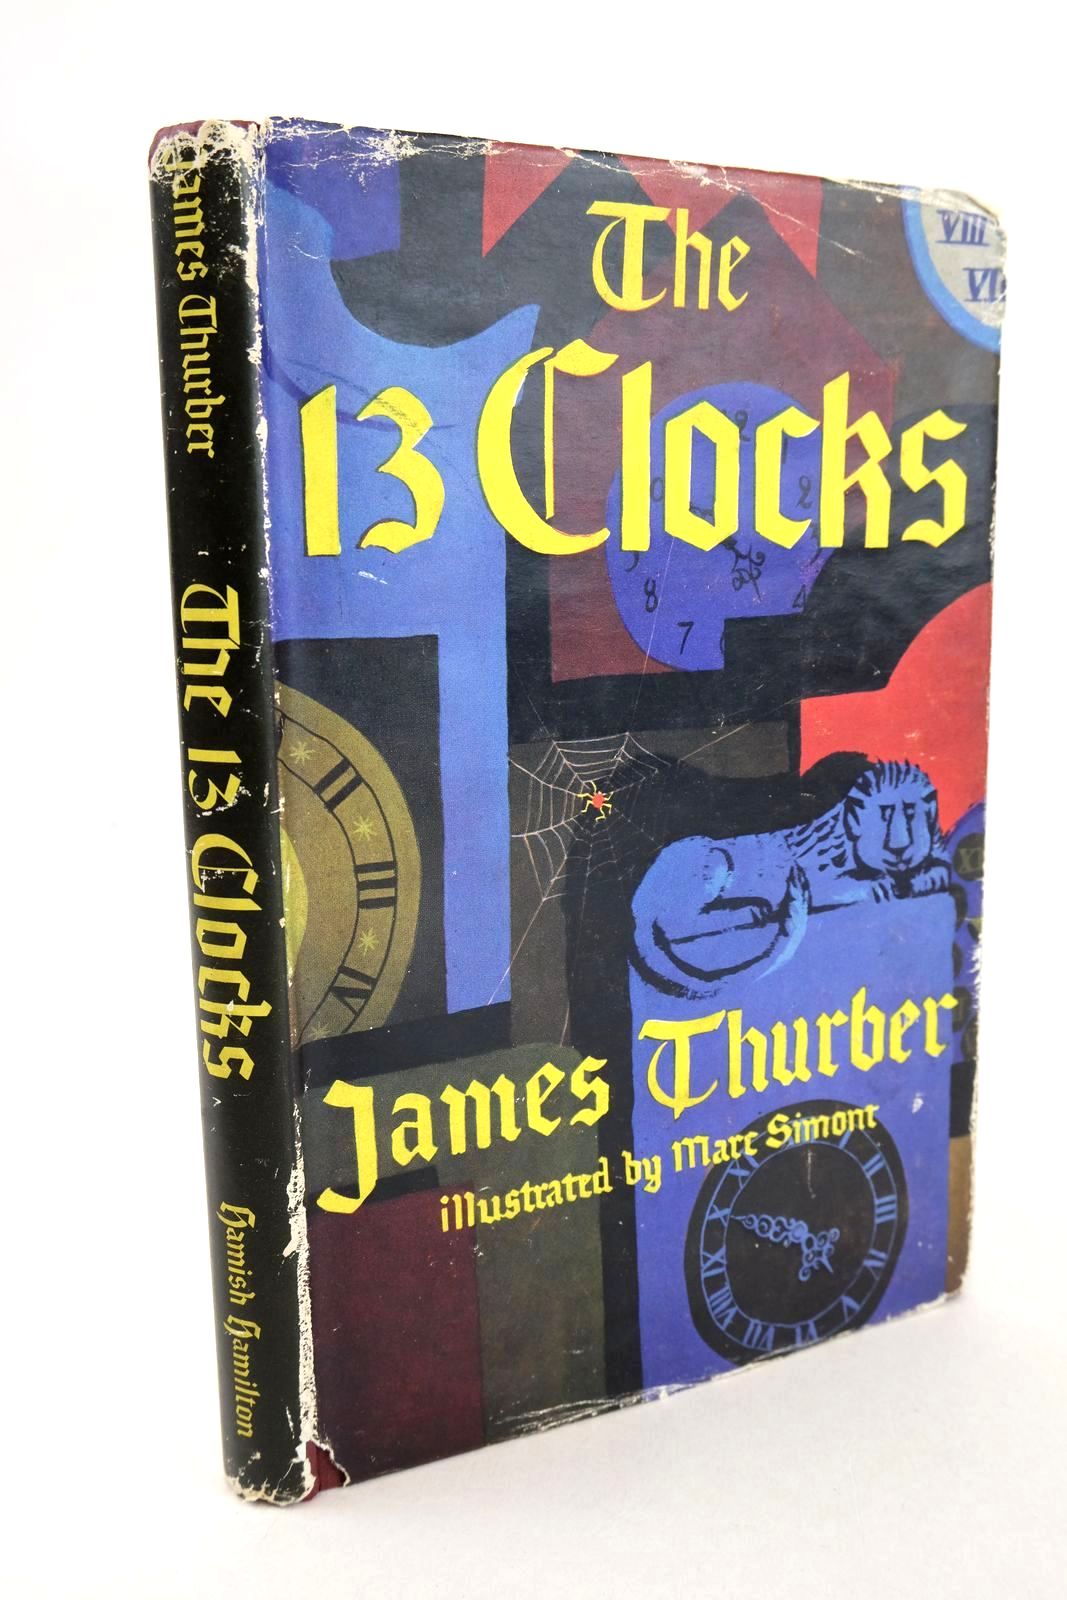 Photo of THE 13 CLOCKS- Stock Number: 1326271